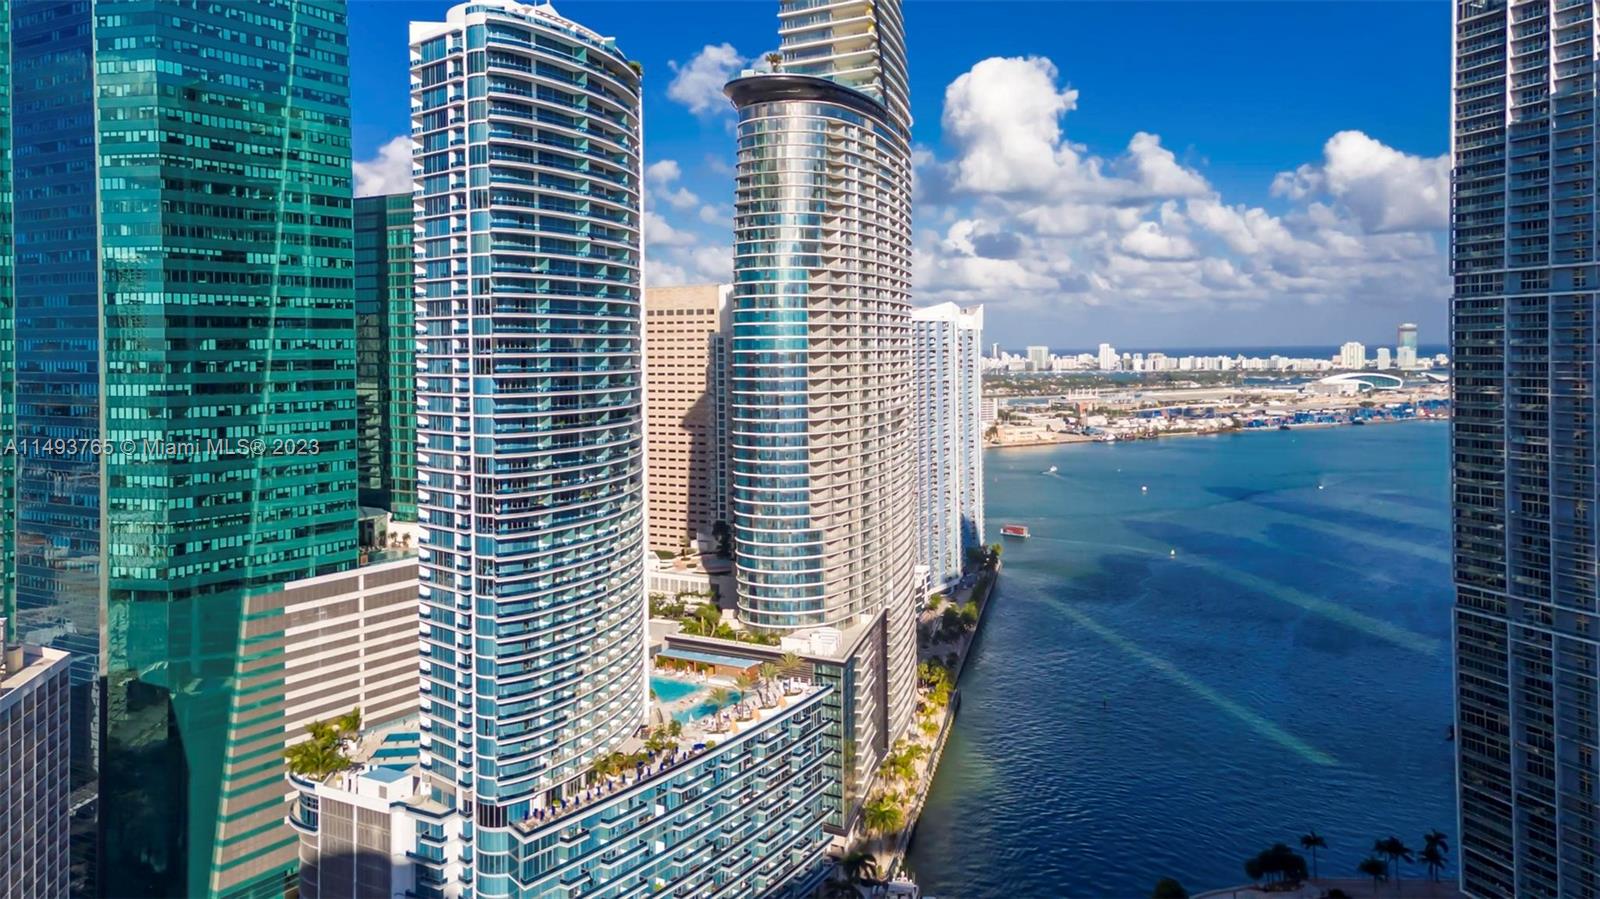 Spacious, waterfront 1/1.5 at EPIC Residences by Ugo Colombo on a high-floor. Best Rooftop Pool in Miami. ZUMA on-site.  Walk into Brickell.  Whole Foods next-door. 10 min to Miami INTL Airport and 10 min to Miami Beach.  Enjoy breathtaking views of Biscayne Bay, and Brickell, from your private waterfront balcony, and soak in the fun all weekend at Area 31, featuring two rooftop pools on the waterfront with restaurant and bar.  Bathroom features jacuzzi tub with rain forest shower.